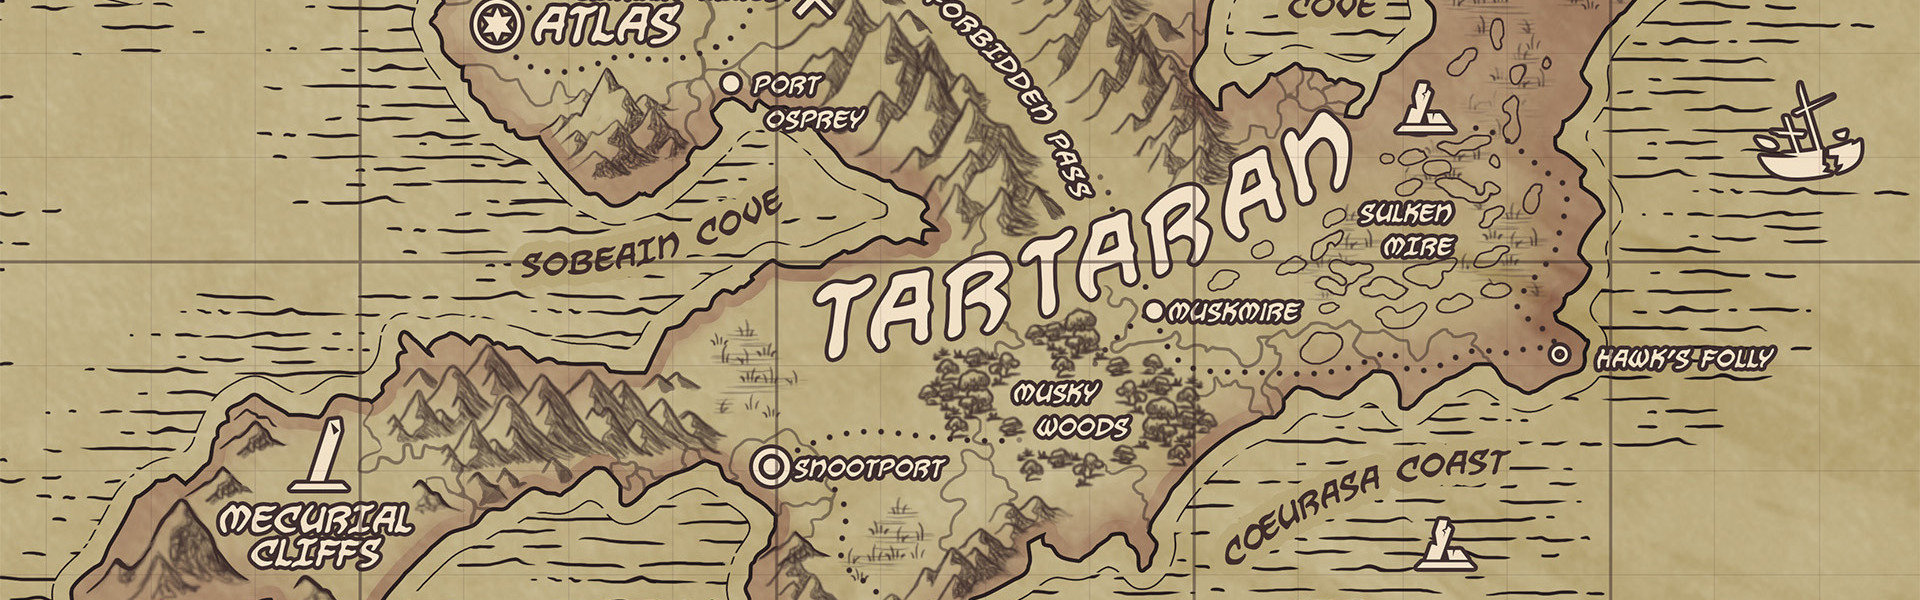 Tartaran, the island surrounded by The Cross. Houses the capital of the region and is home to the Order of Arcane Sages.